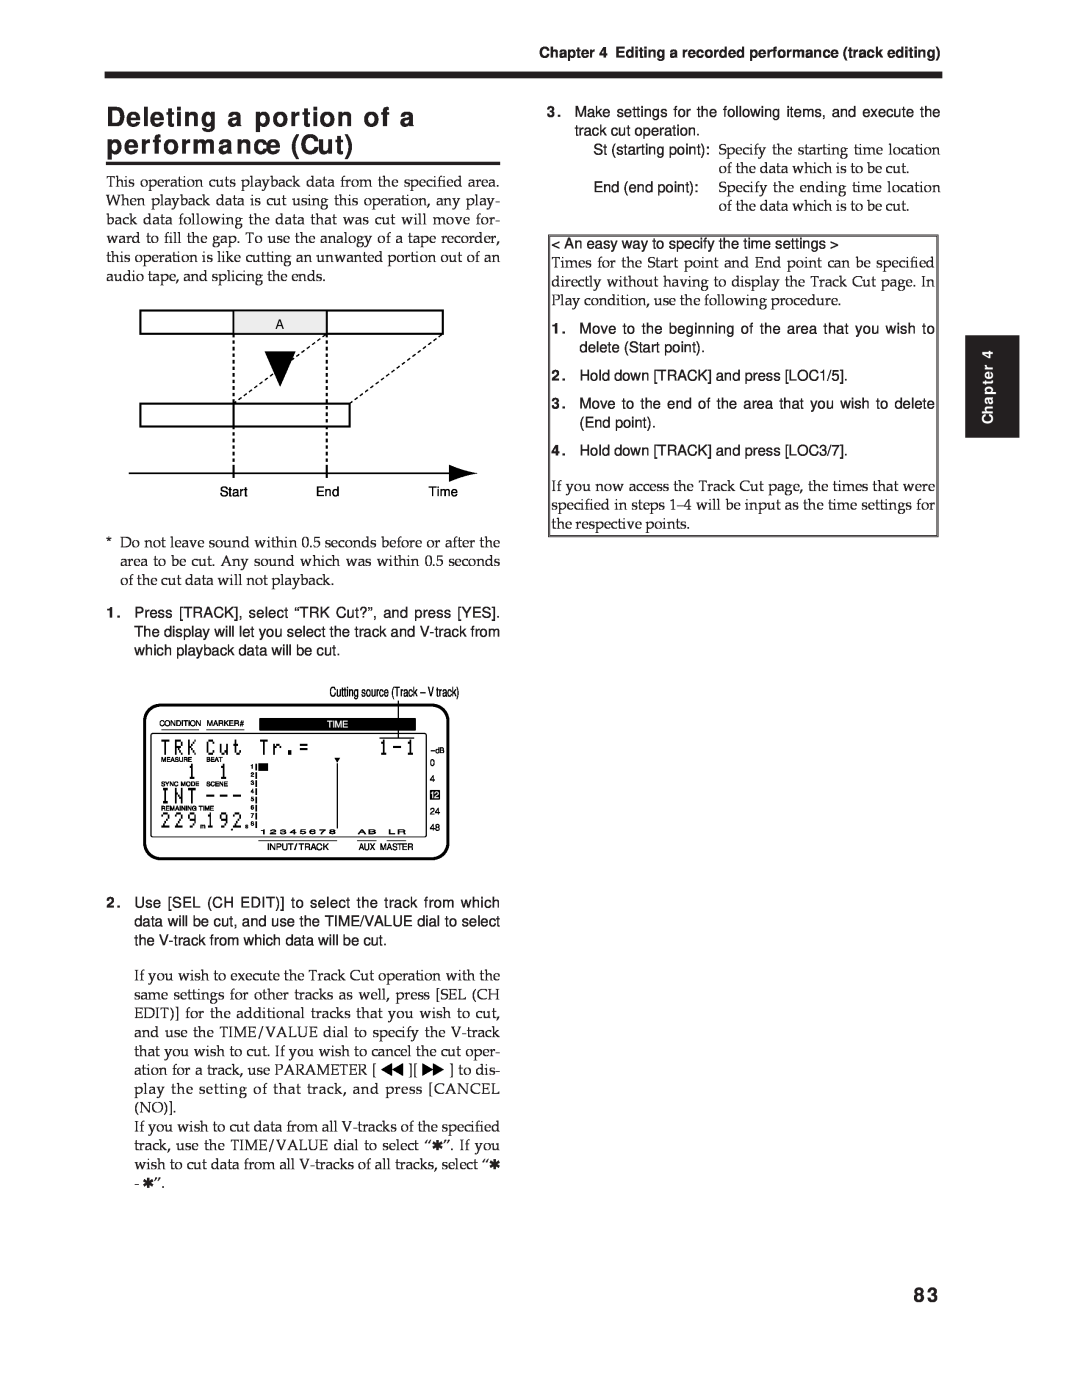 Roland Vs-880 important safety instructions Deleting a portion of a performance Cut, Chapter 